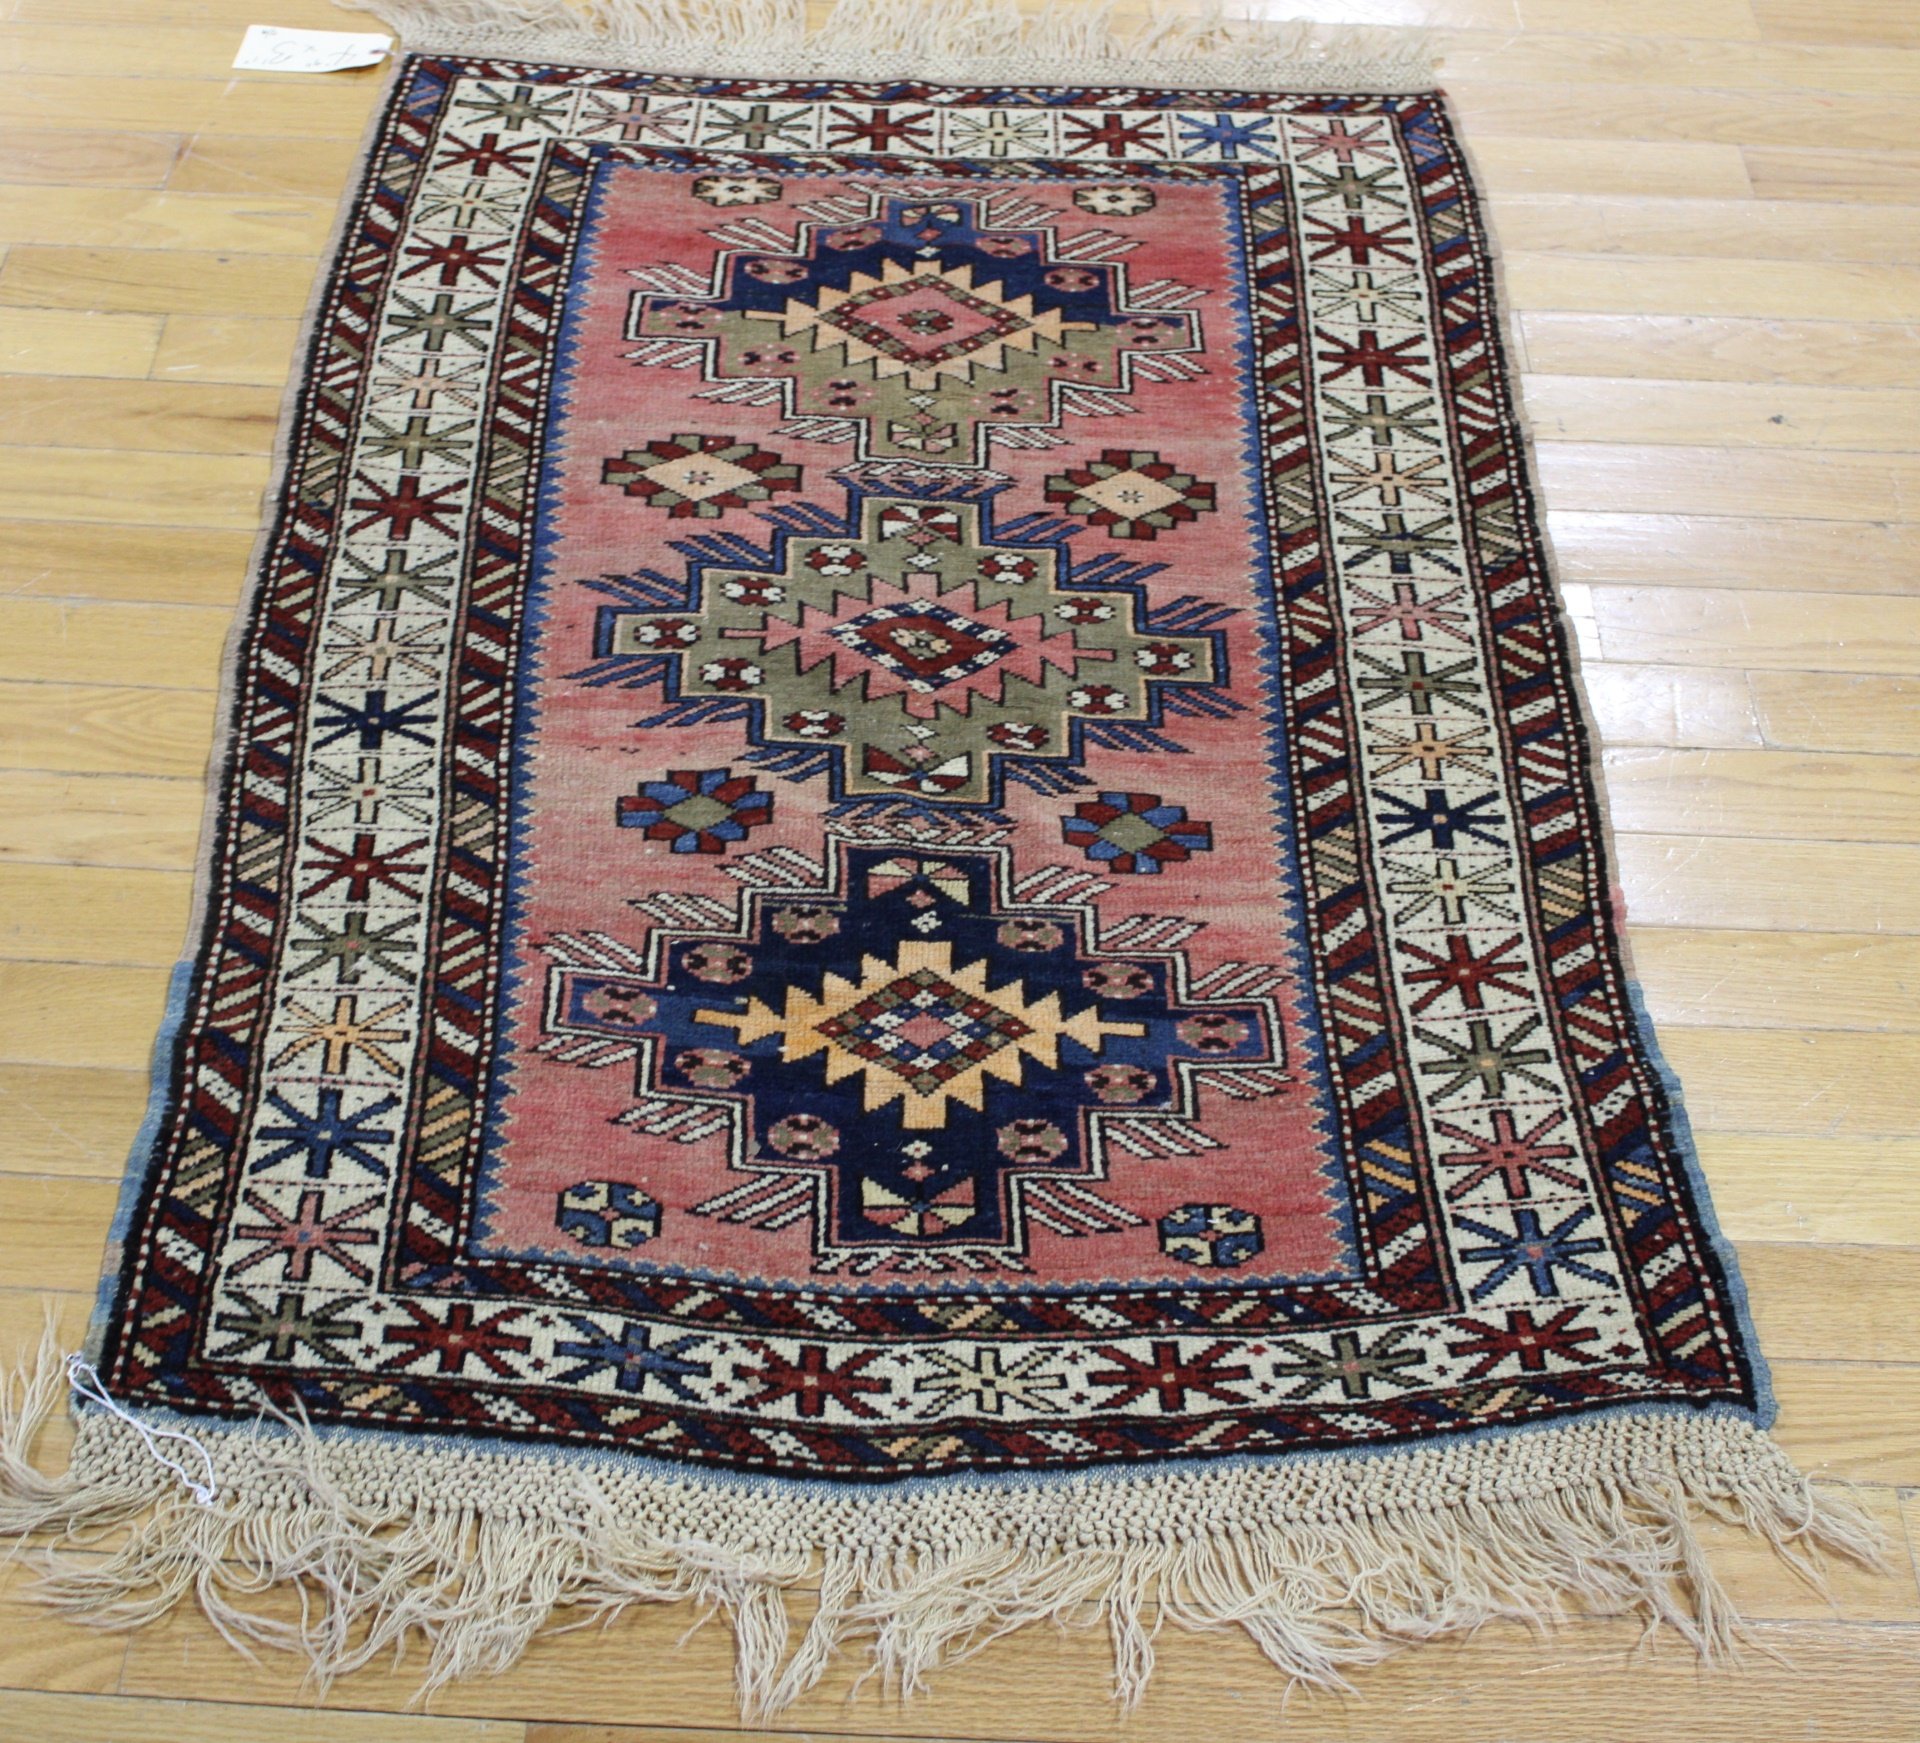 ANTIQUE AND FINELY HAND WOVEN KAZAK 3b9dae